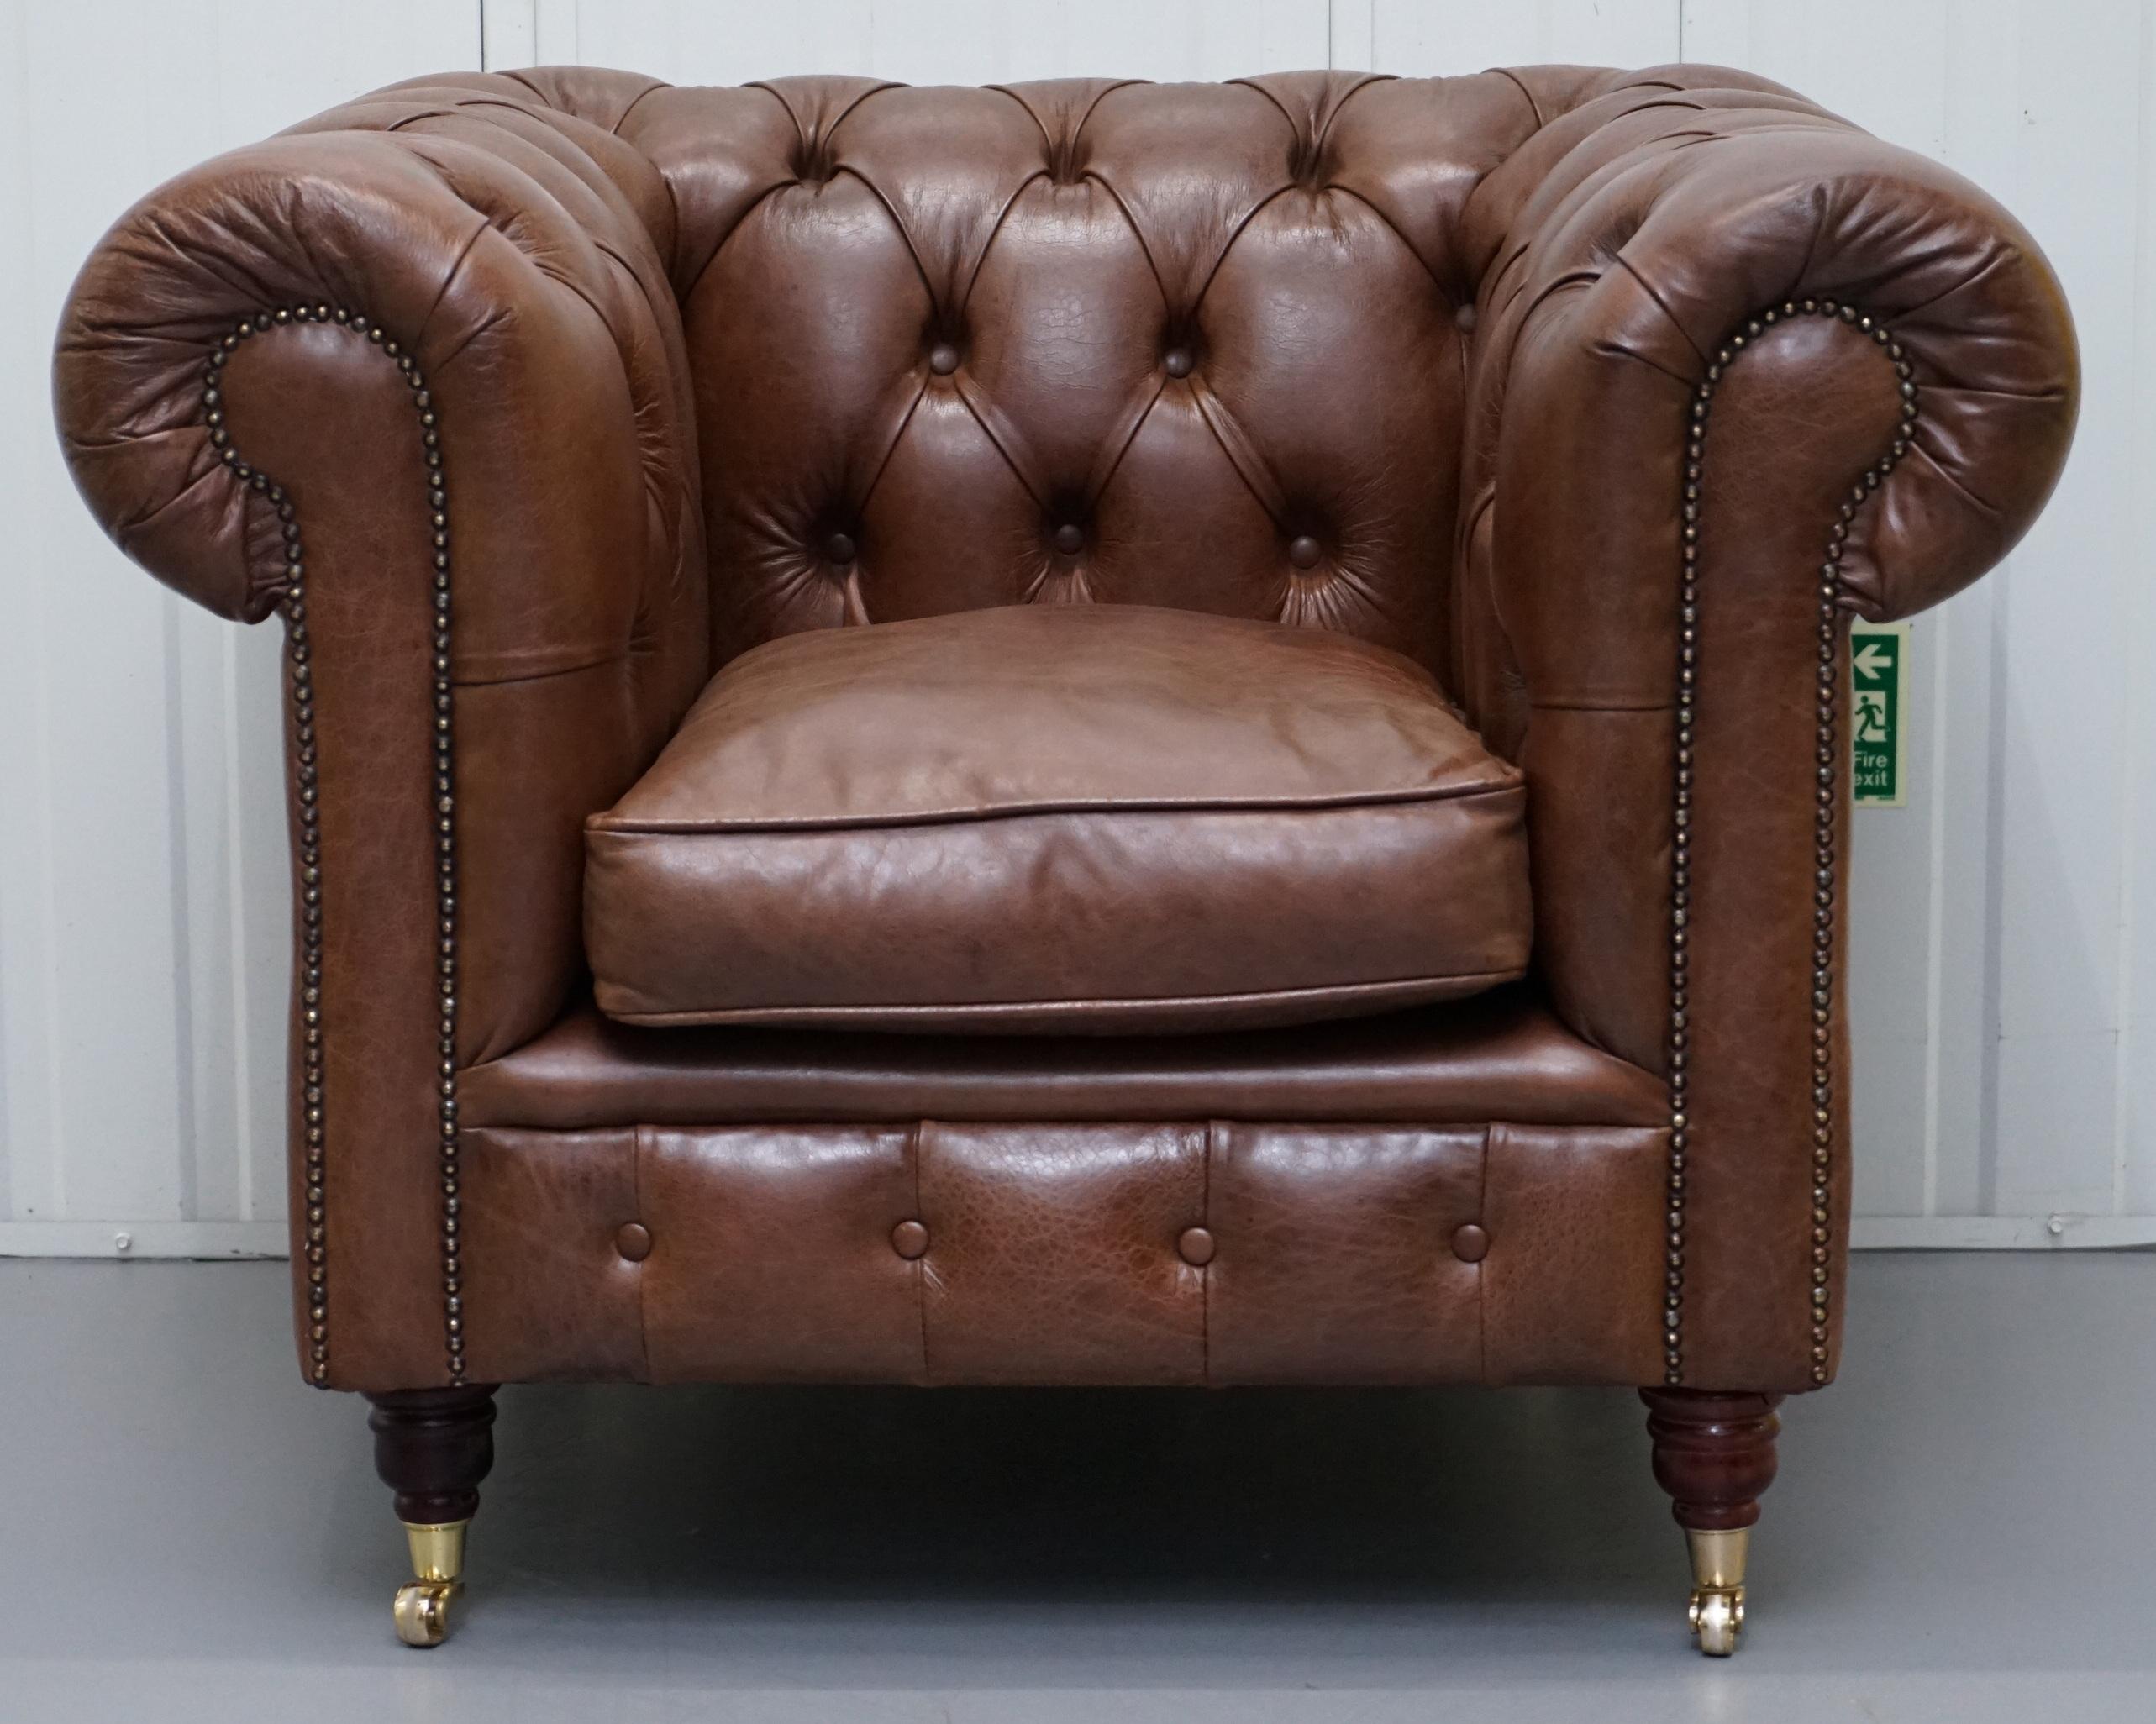 Chesterfield Heritage Brown Leather Sofas & Armchair Suite 2-3 3-4 Seat Sofas 9